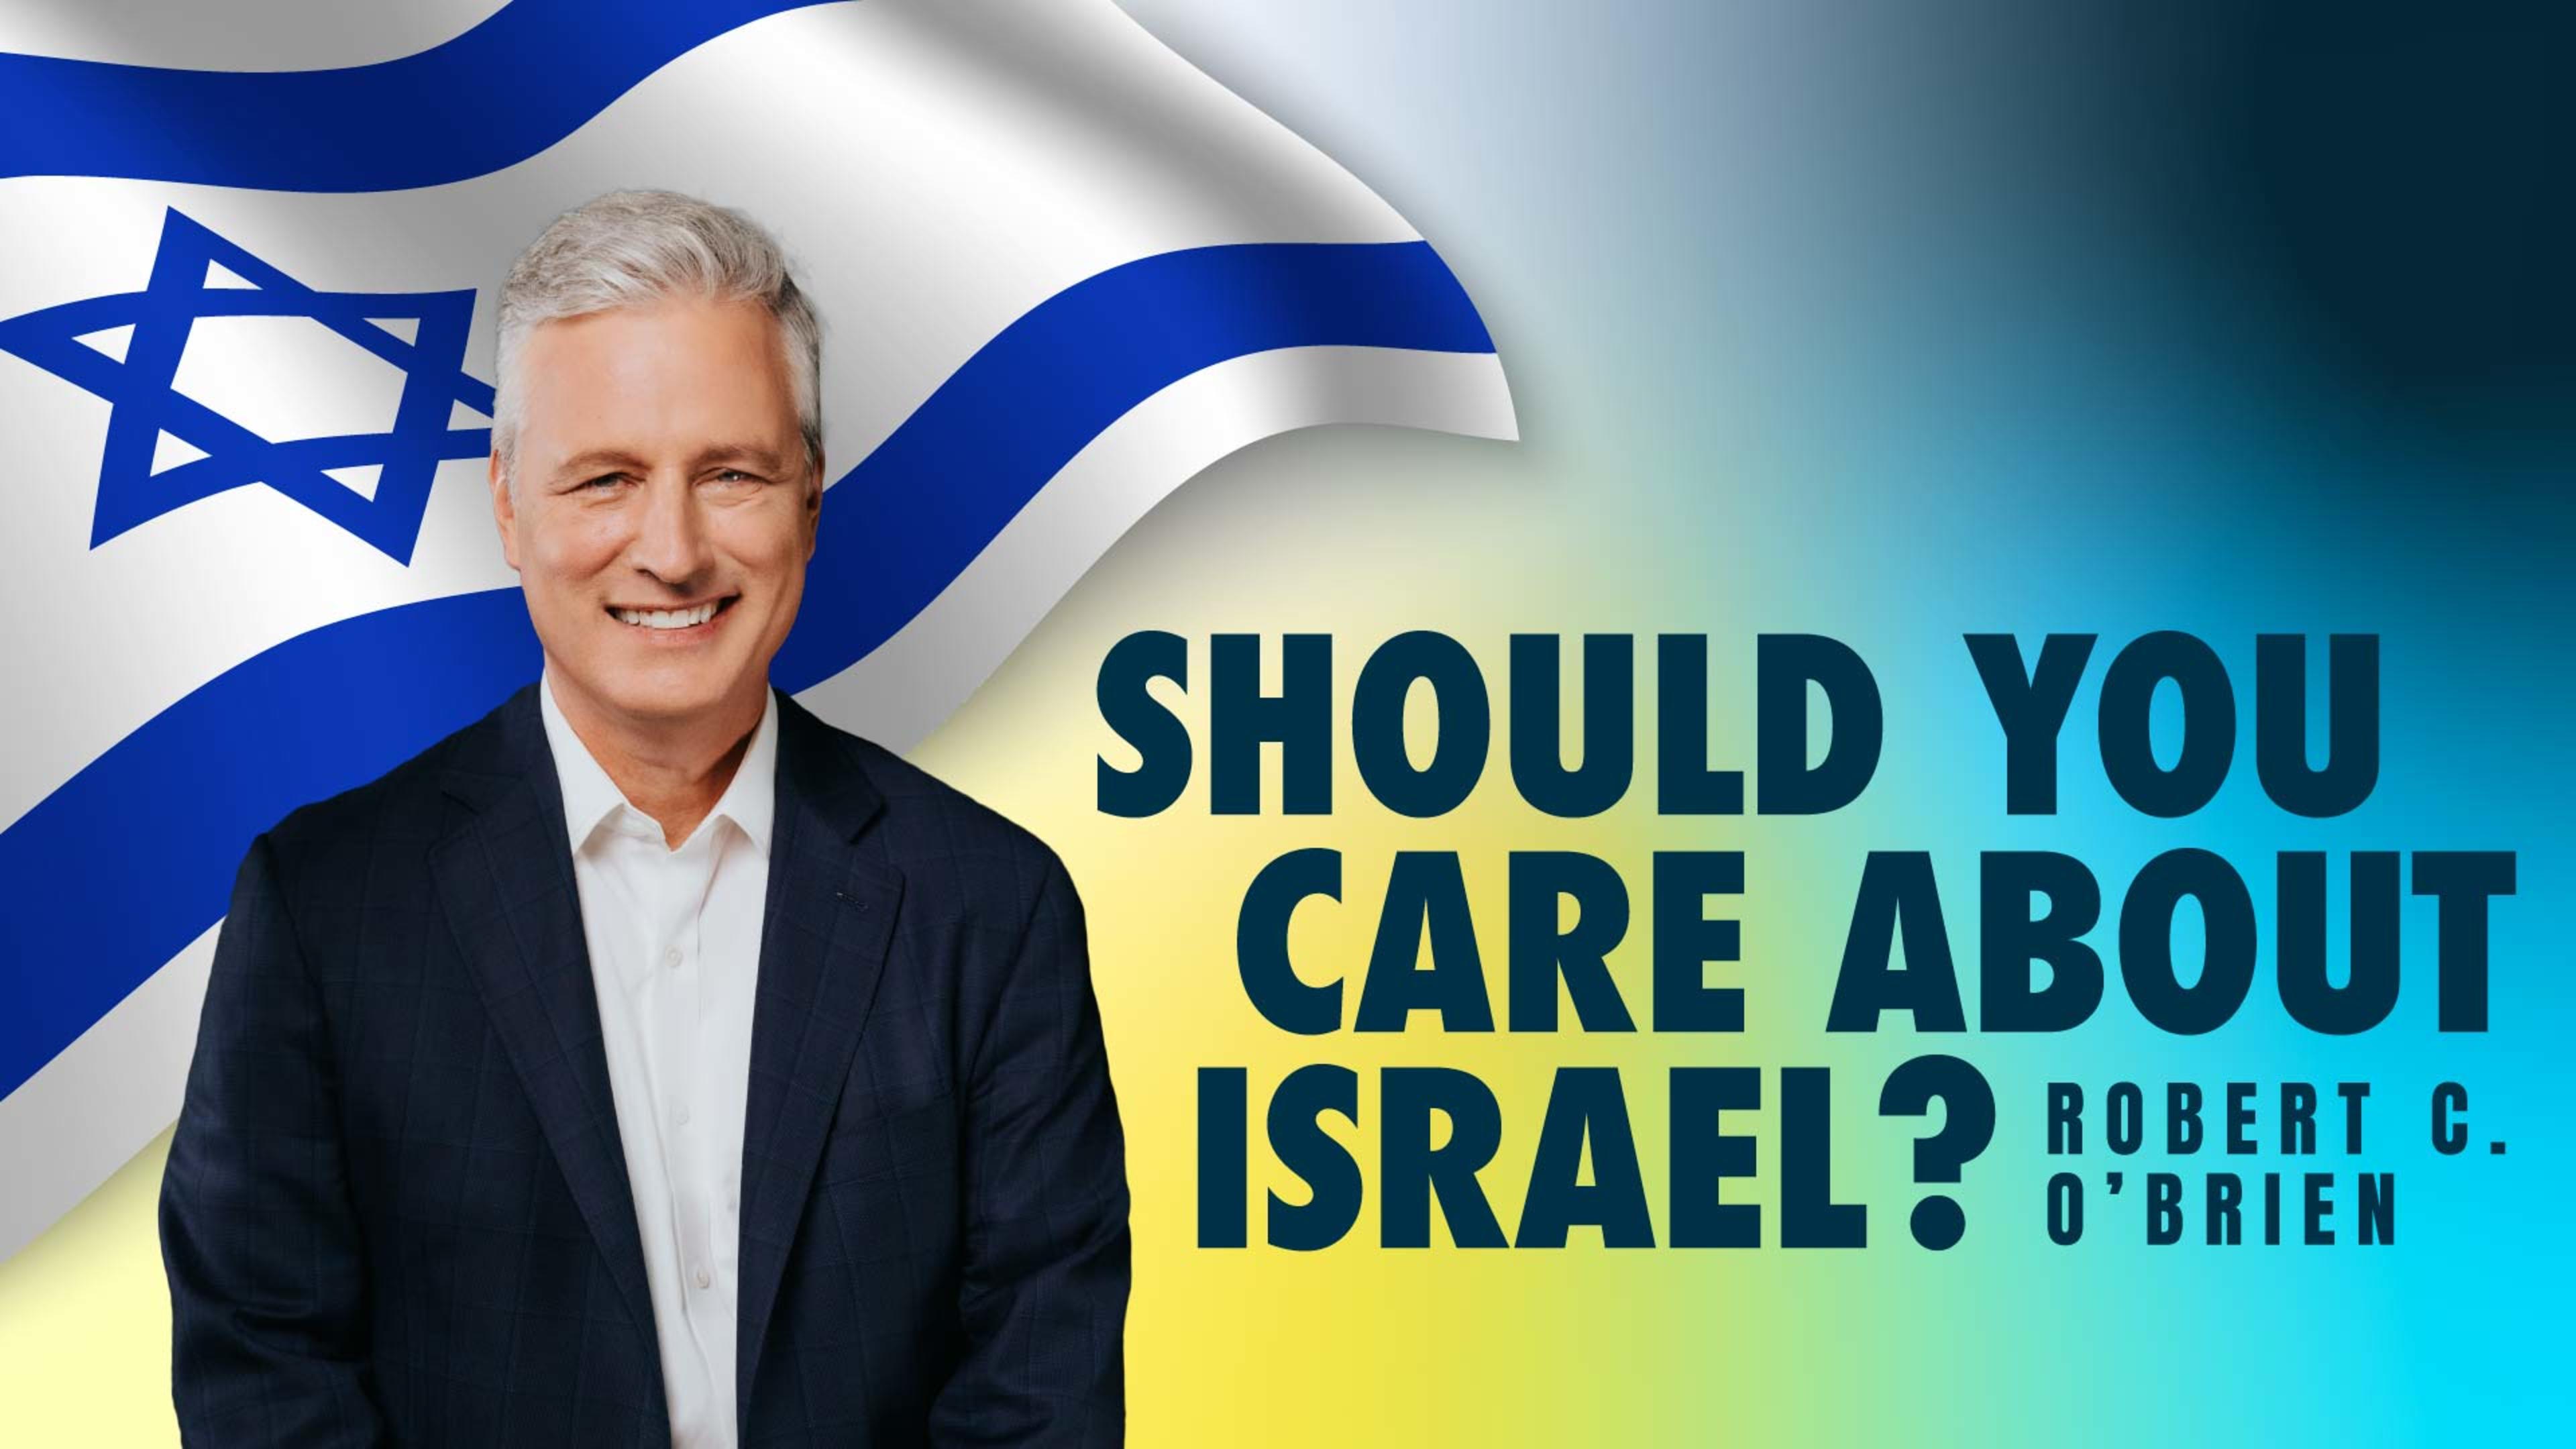 Should You Care about Israel?